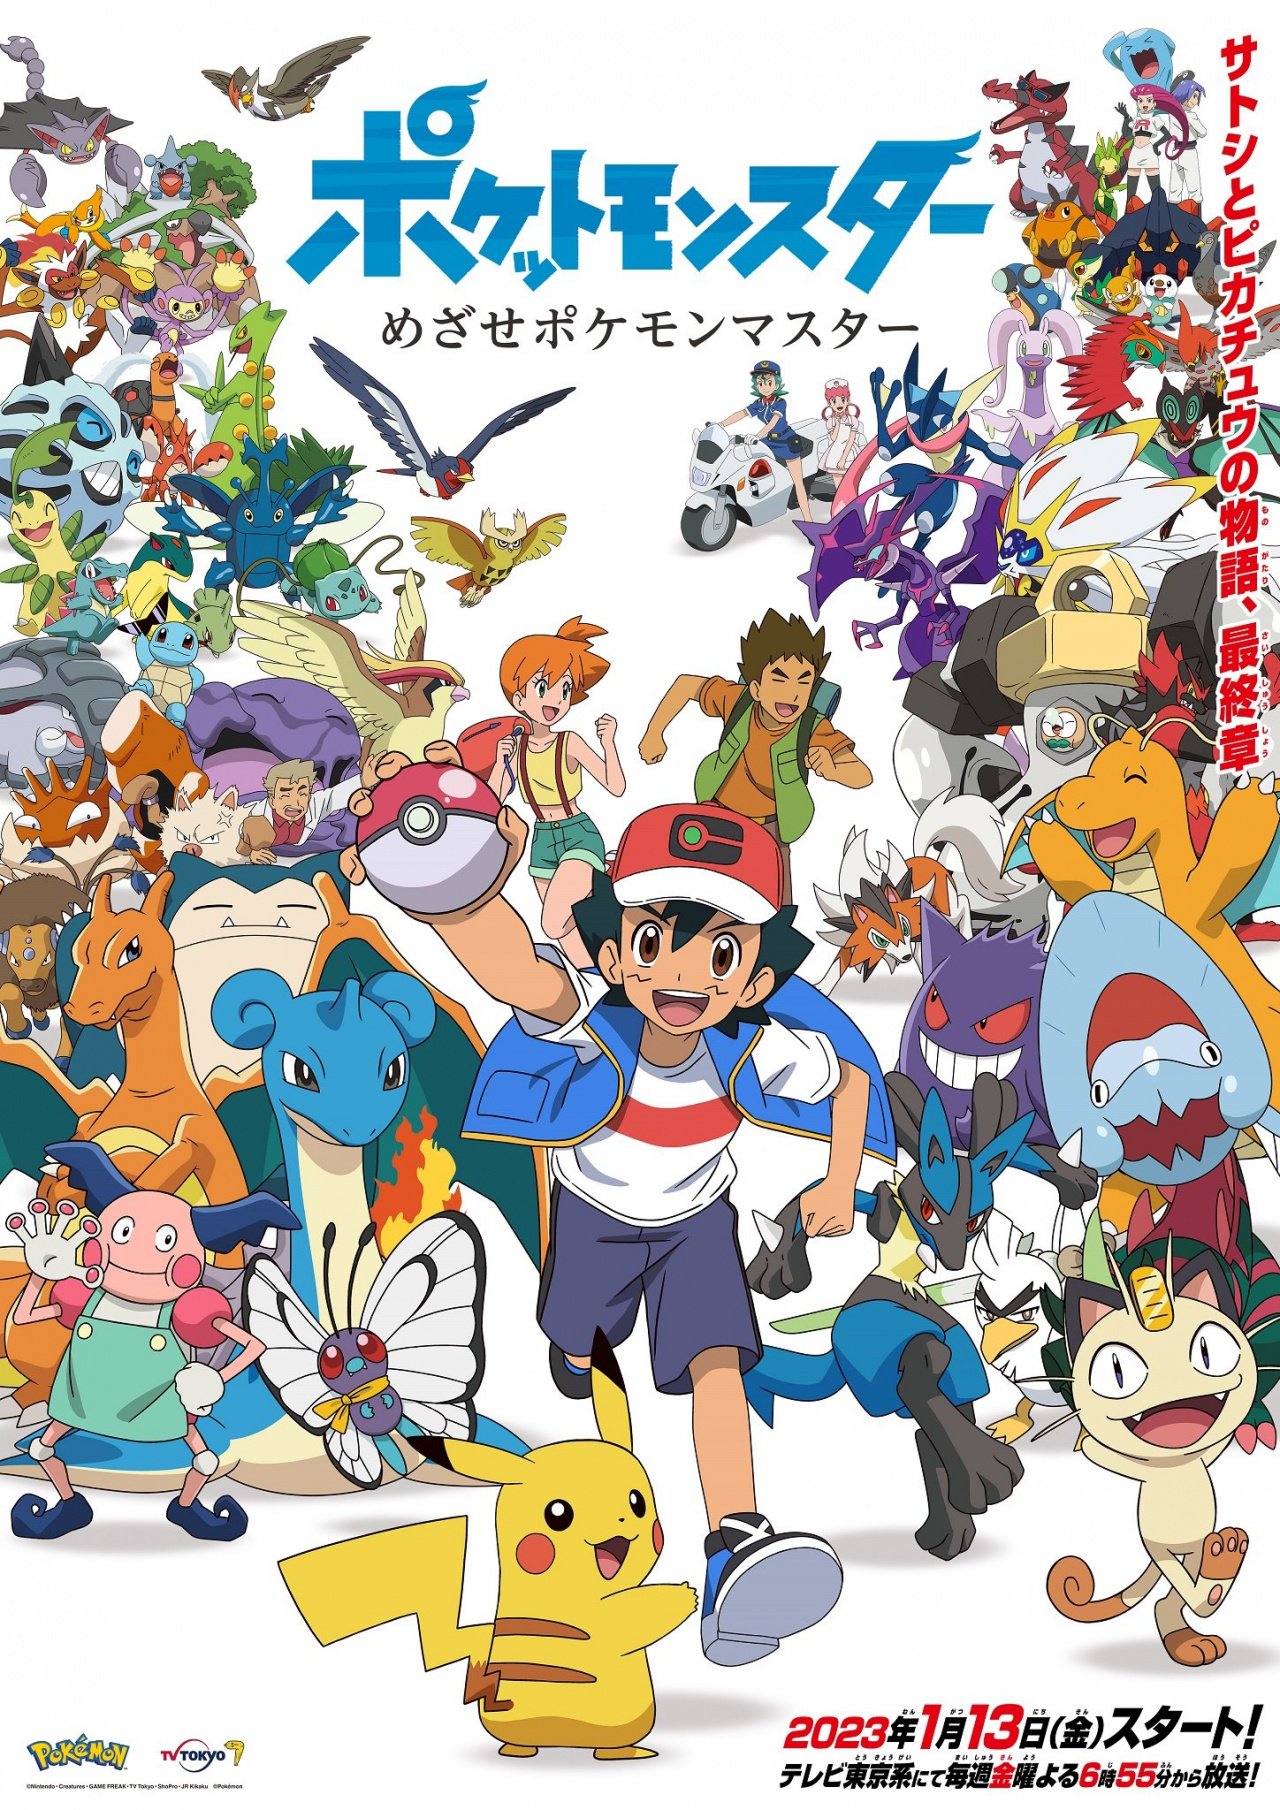 Ash Ketchum And Pikachu's Time In The Pokémon Anime Is Coming To An End |  Nintendo Life